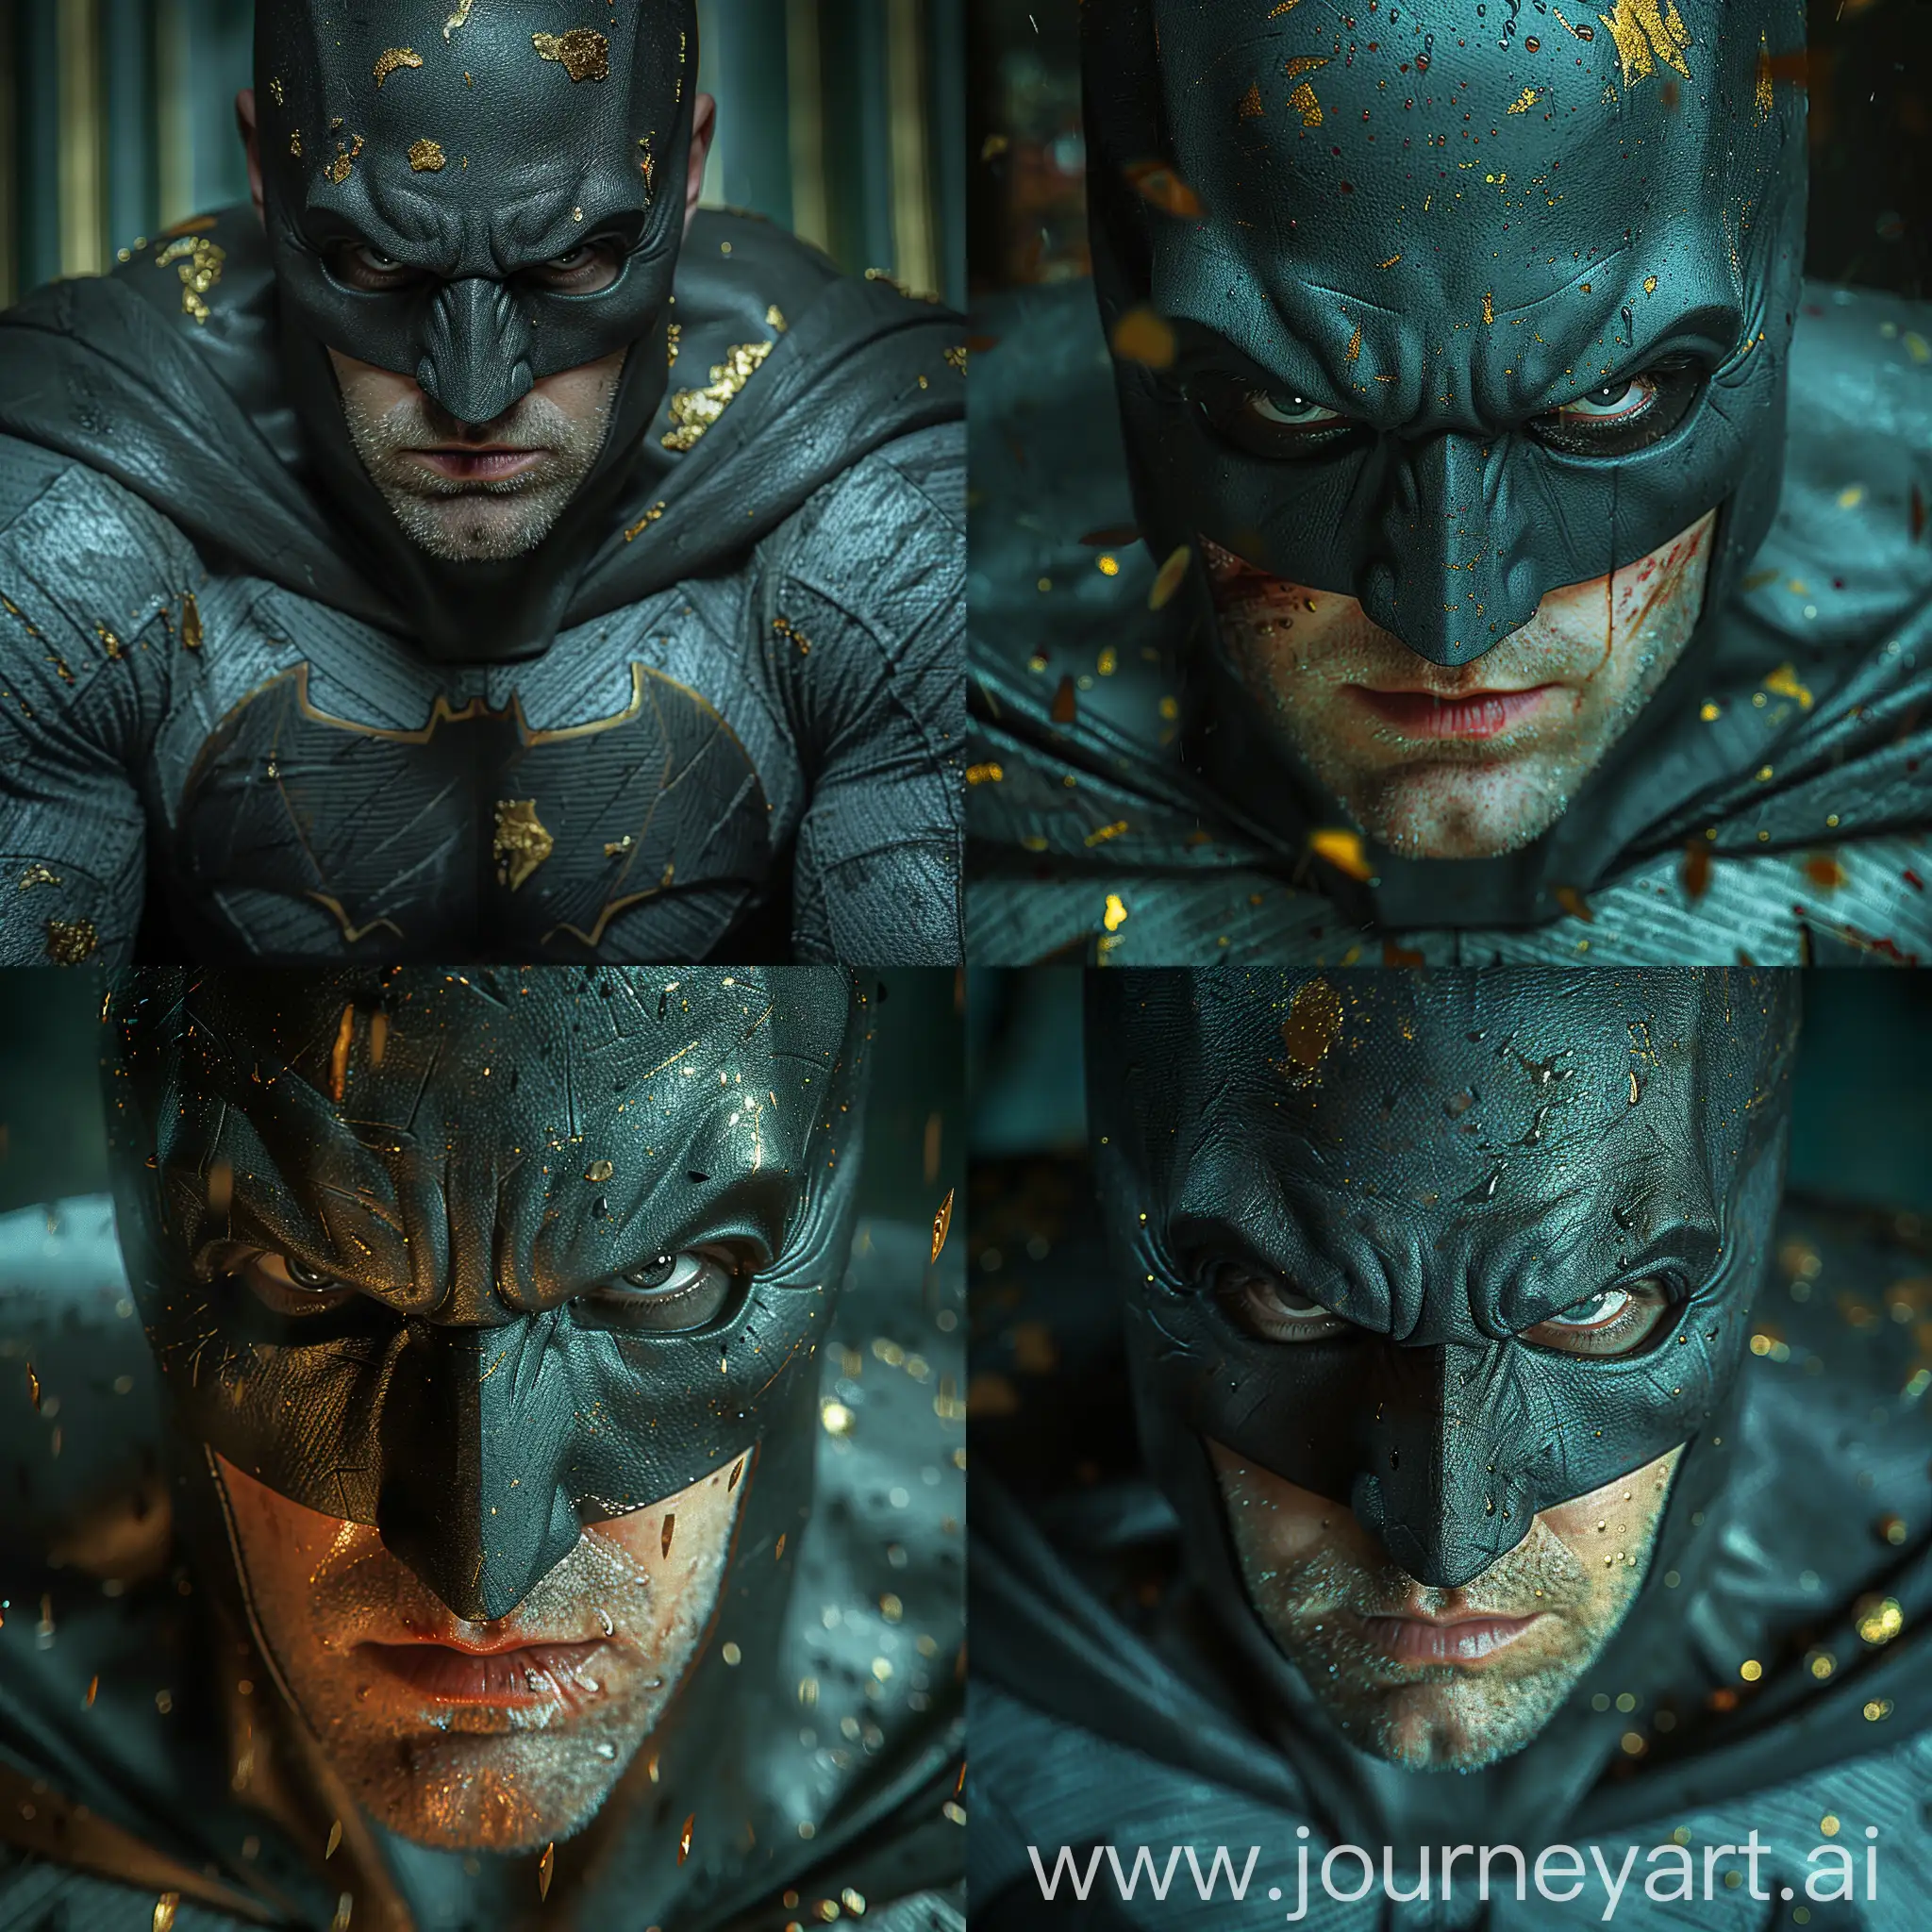 Brooding-Batman-Portrait-with-Dramatic-Lighting-and-Gotham-Atmosphere